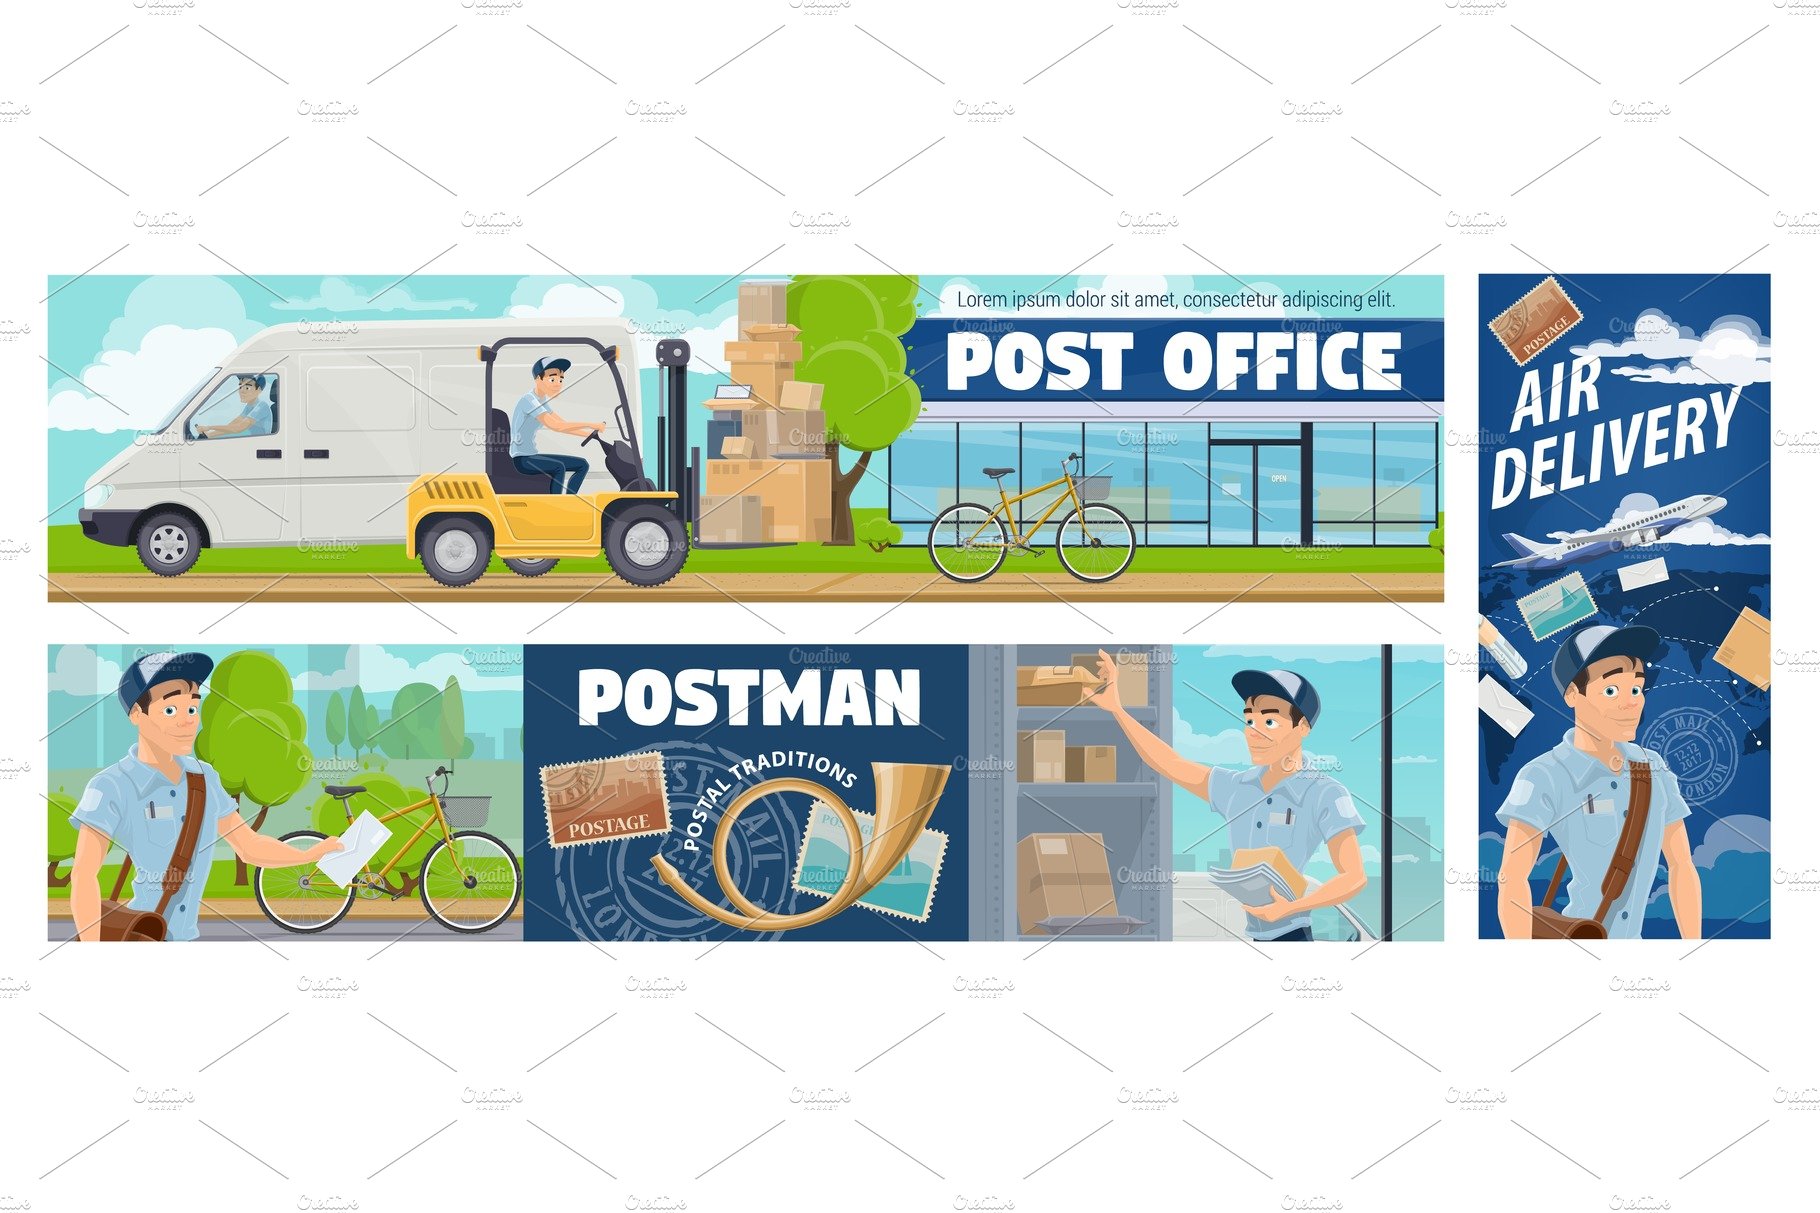 Post office mail delivery cover image.